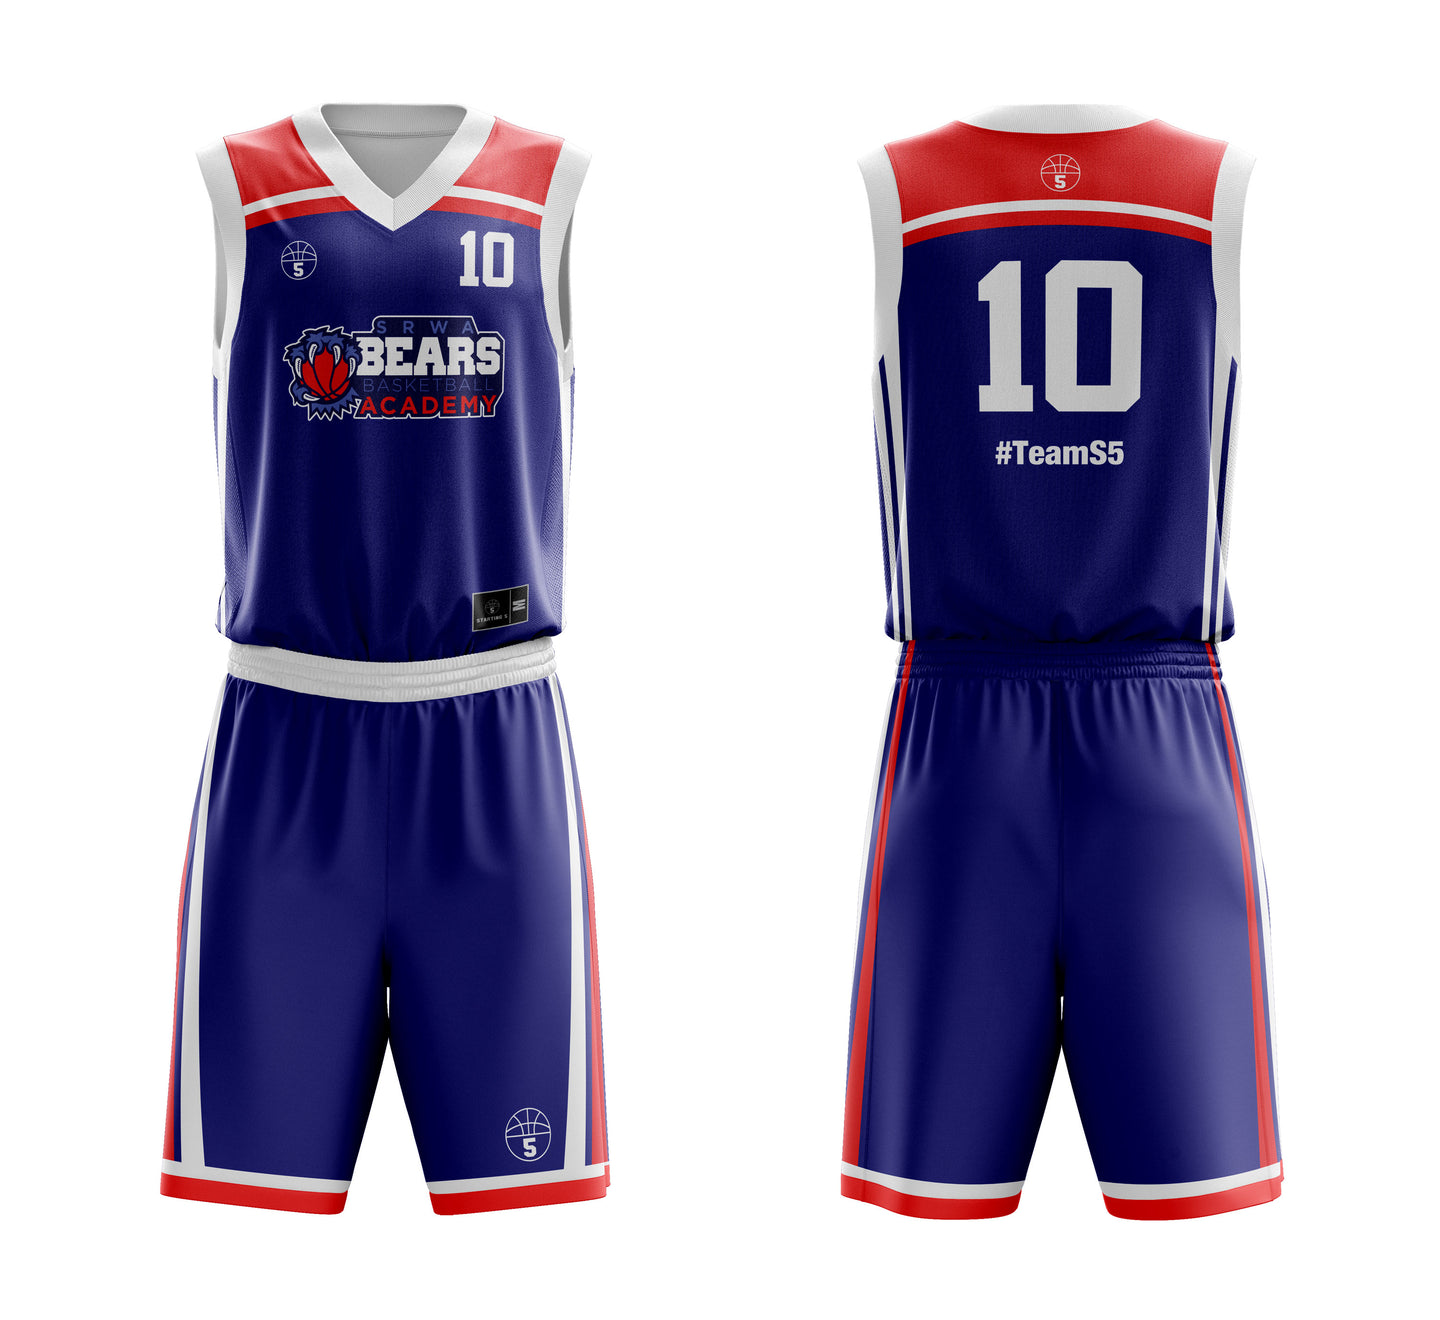 STARTING 5 Sublimated Reversible Kit Example 5